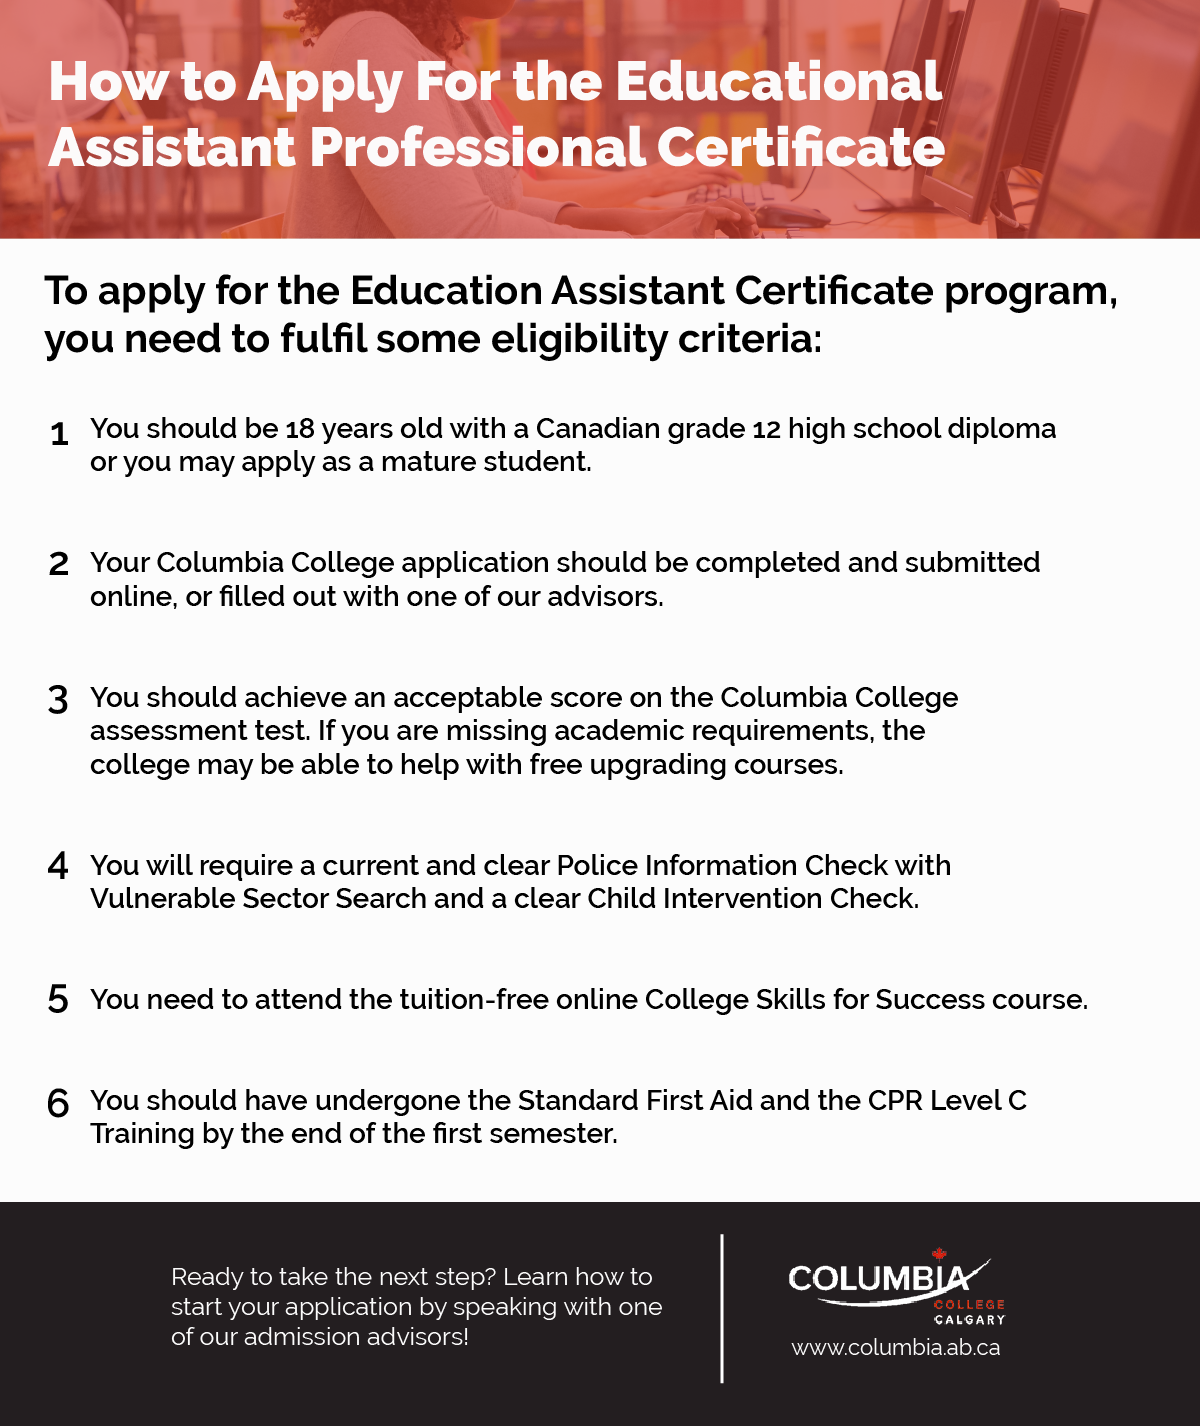 Apply for the Educational Assistant Professional Certificate